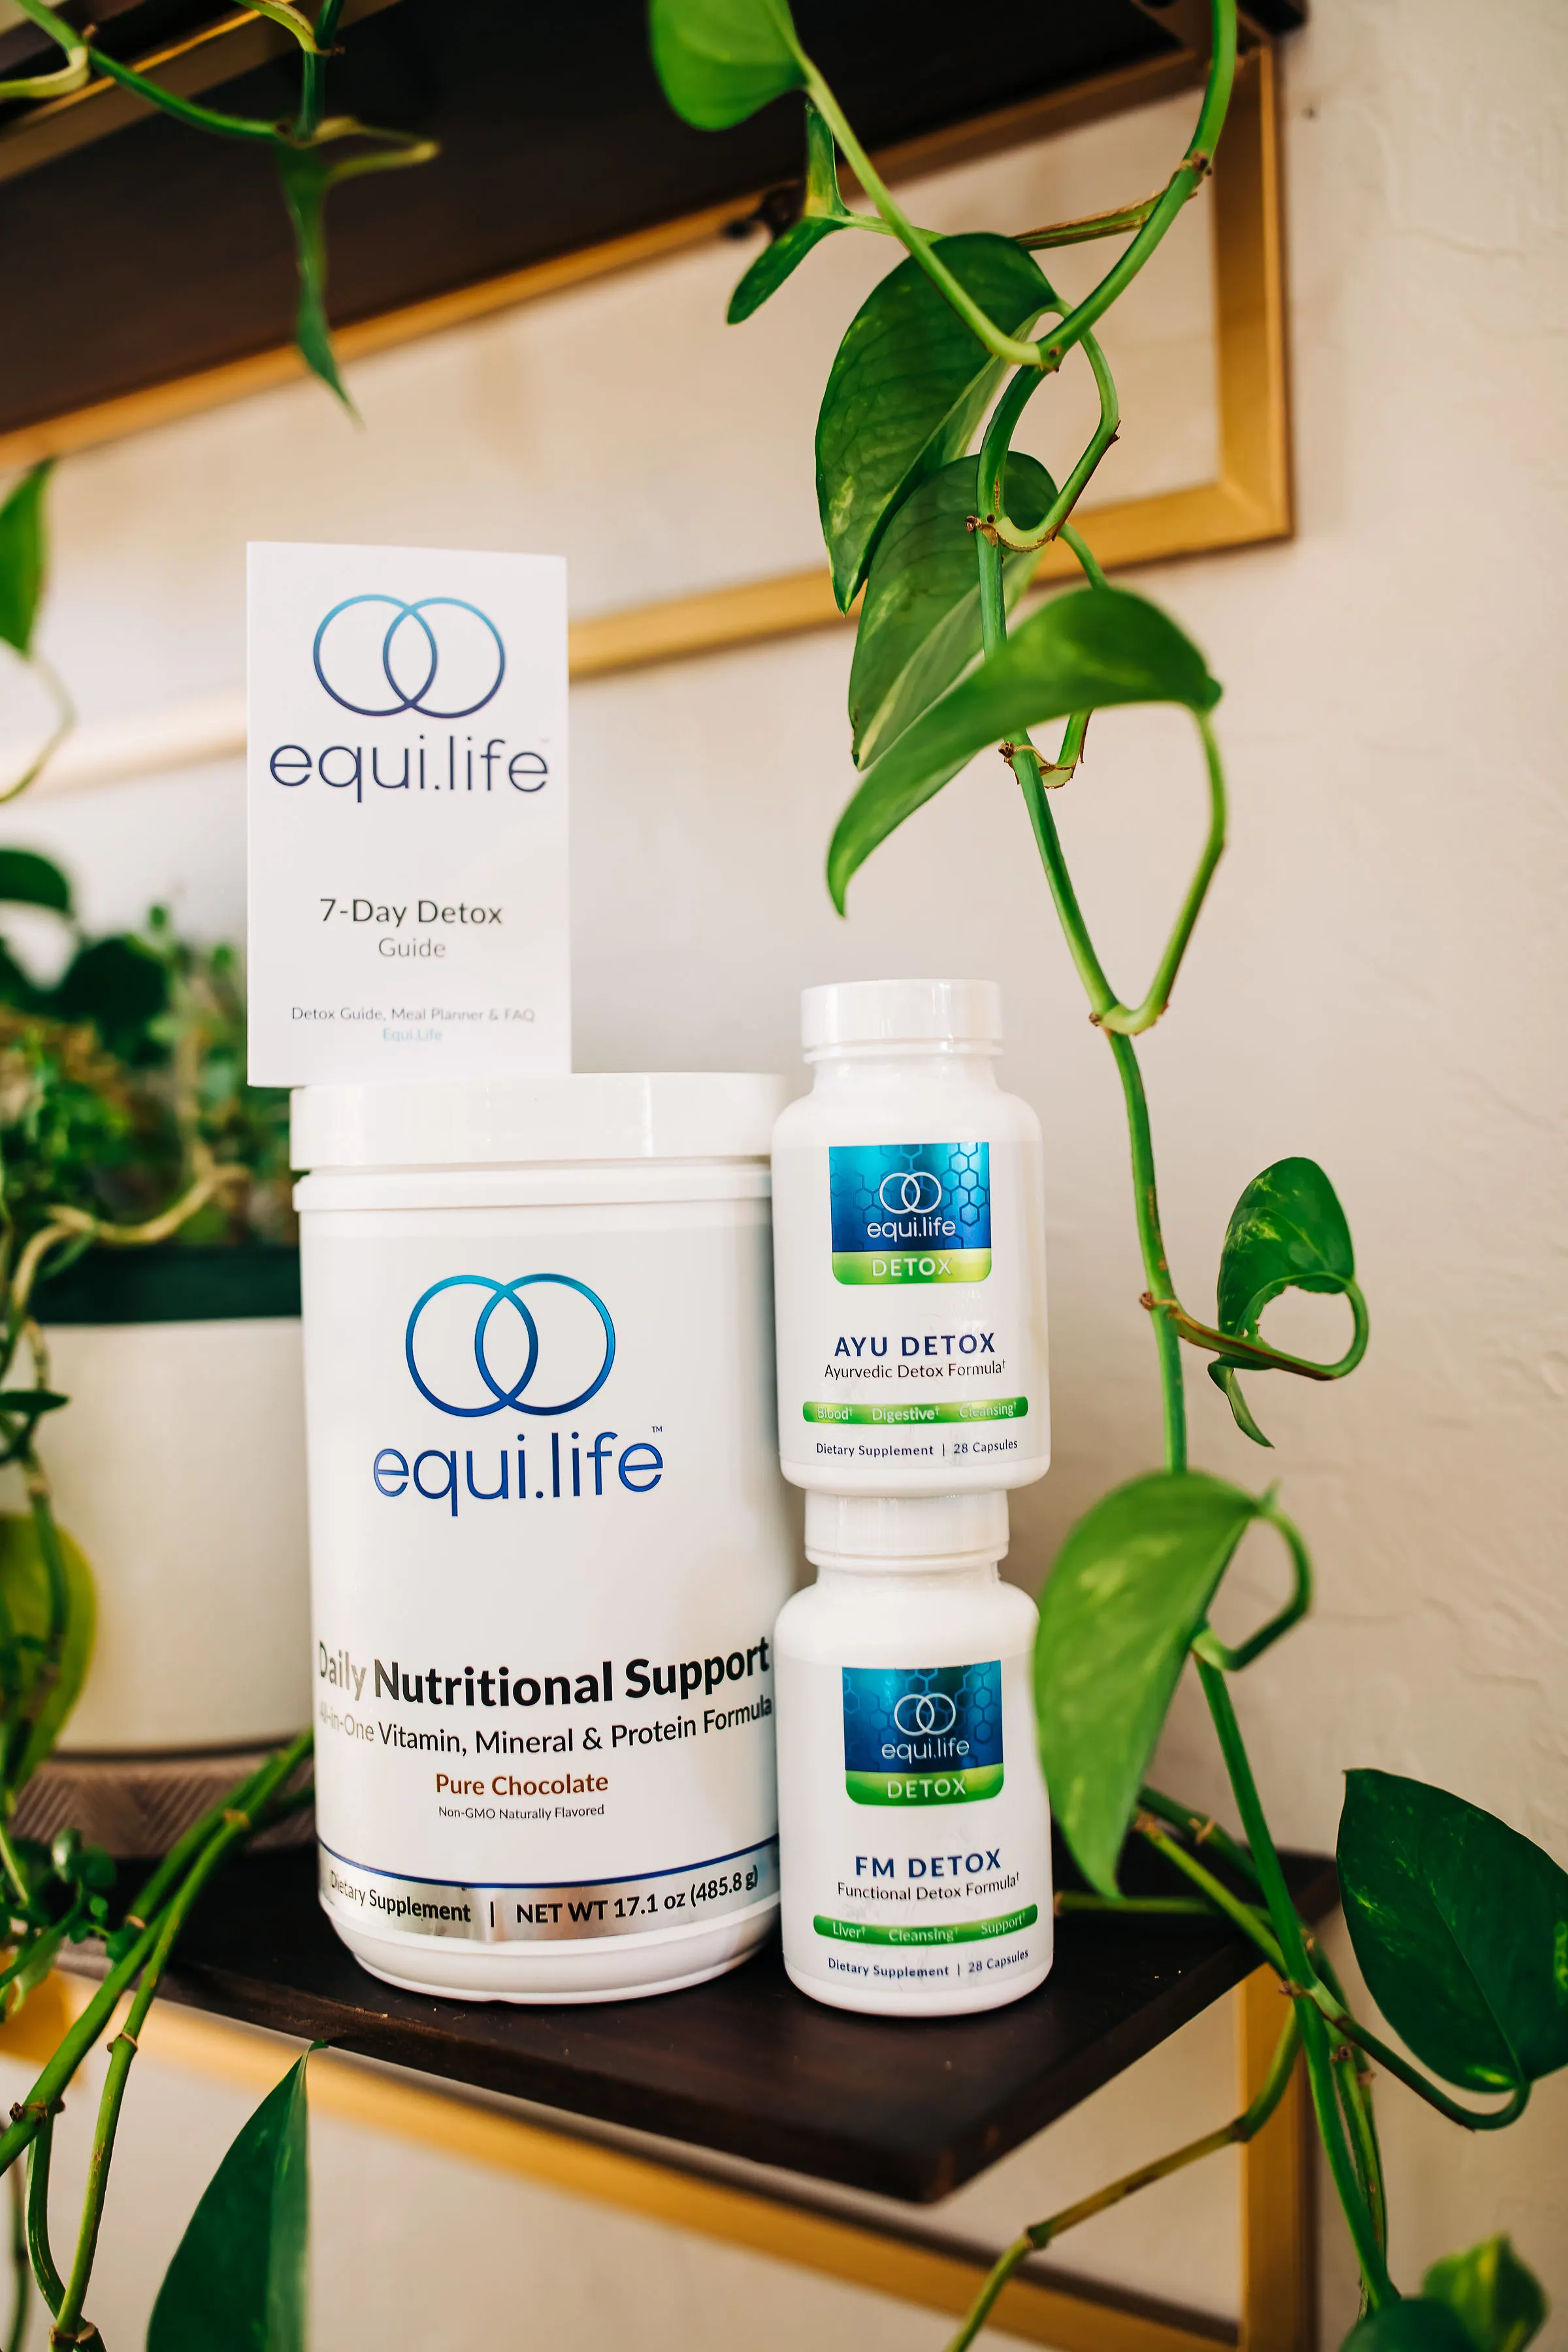 EquiLife products